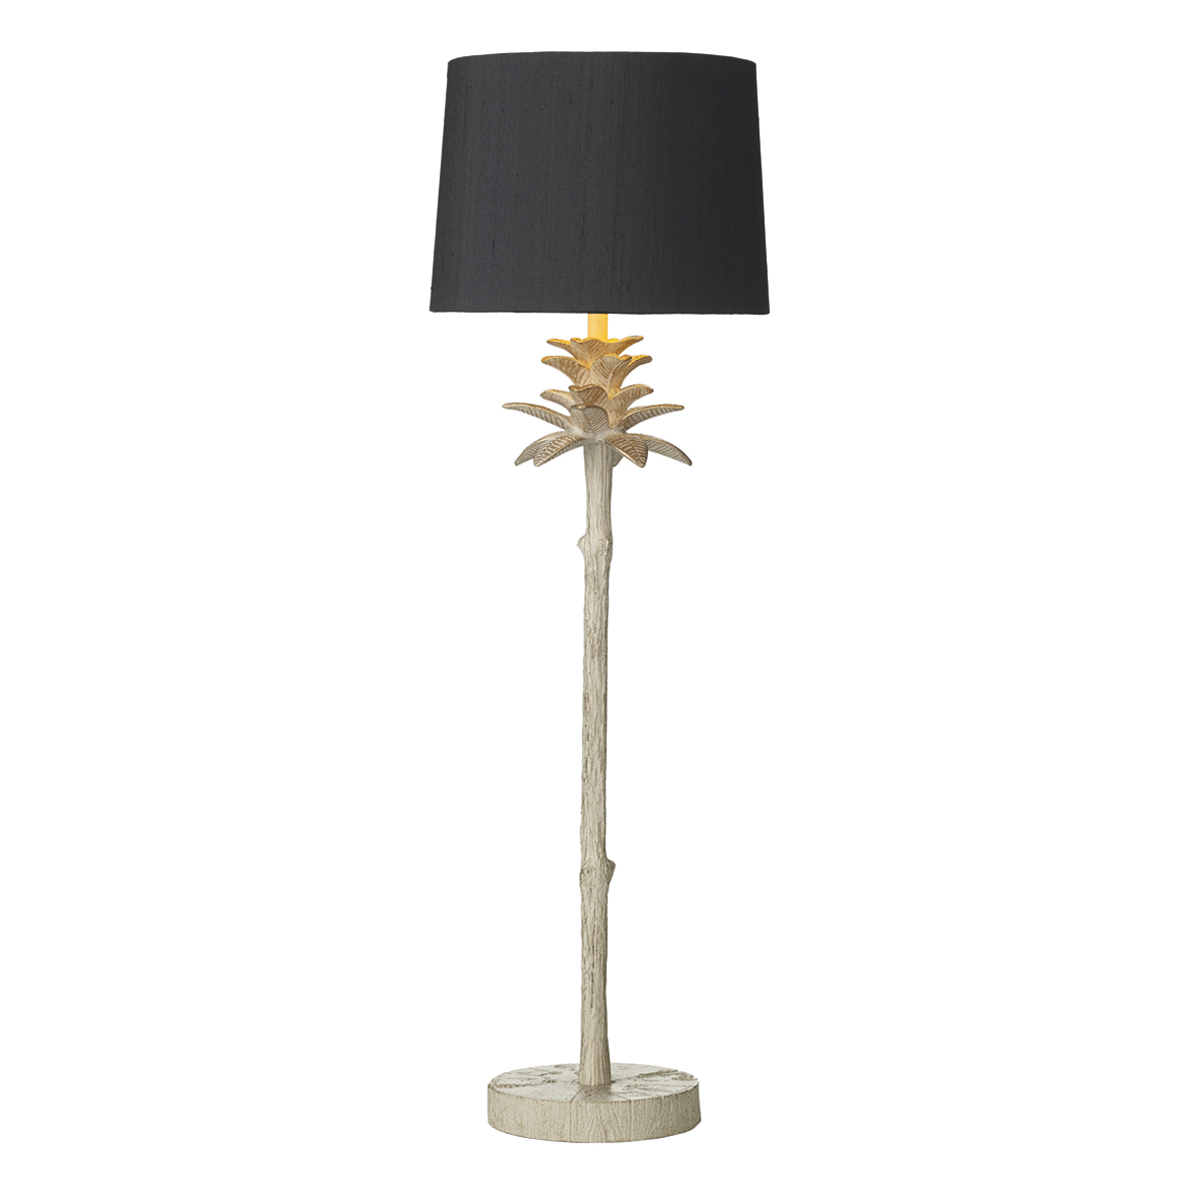 Cabana Table Lamp Cream Gold Base Only, Table Lamps Gold Finish